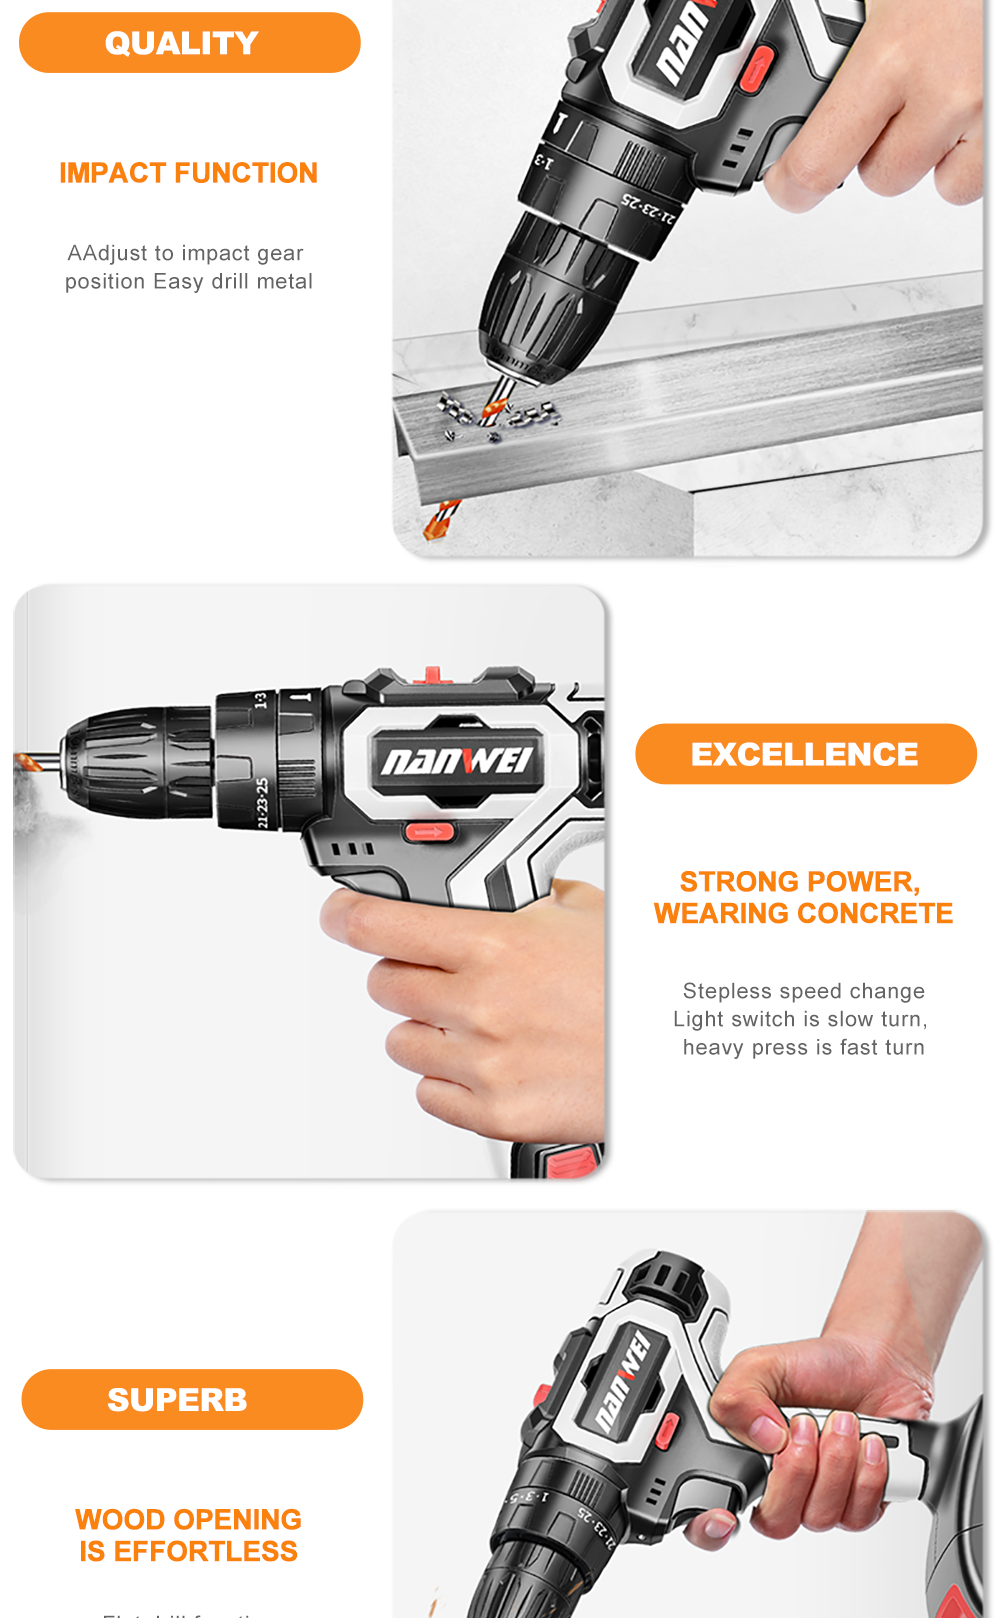 Nanwei-21V-Brushless-Impact-Power-Drill-35NM-Li-ion-Rechargeable-Electric-Flat-Drill-Screw-Driver-2--1695400-4